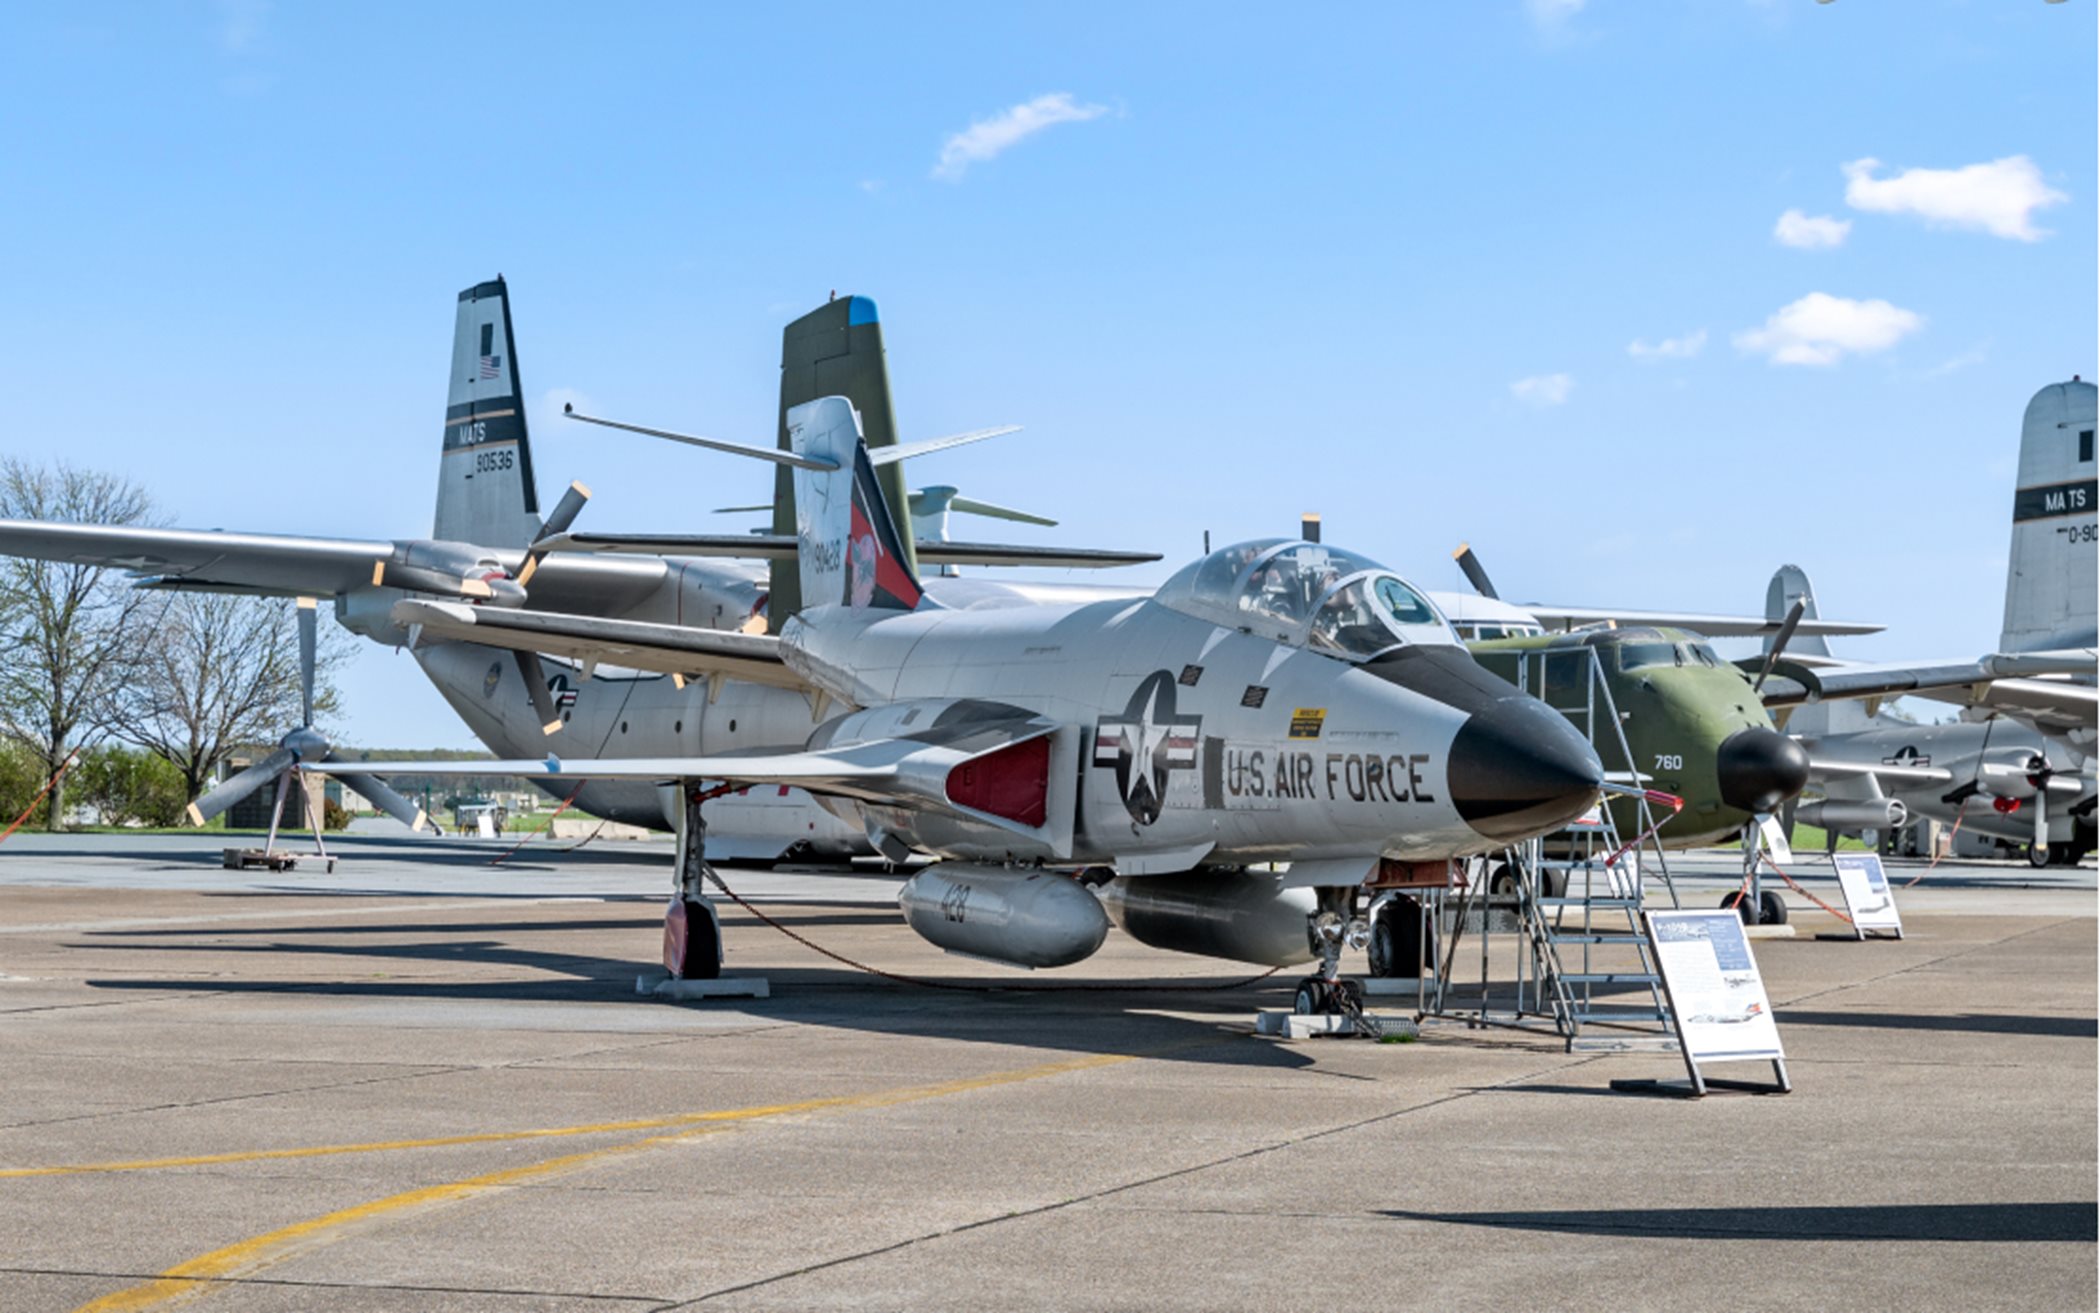 Aircraft at the Air Mobility Command Museum